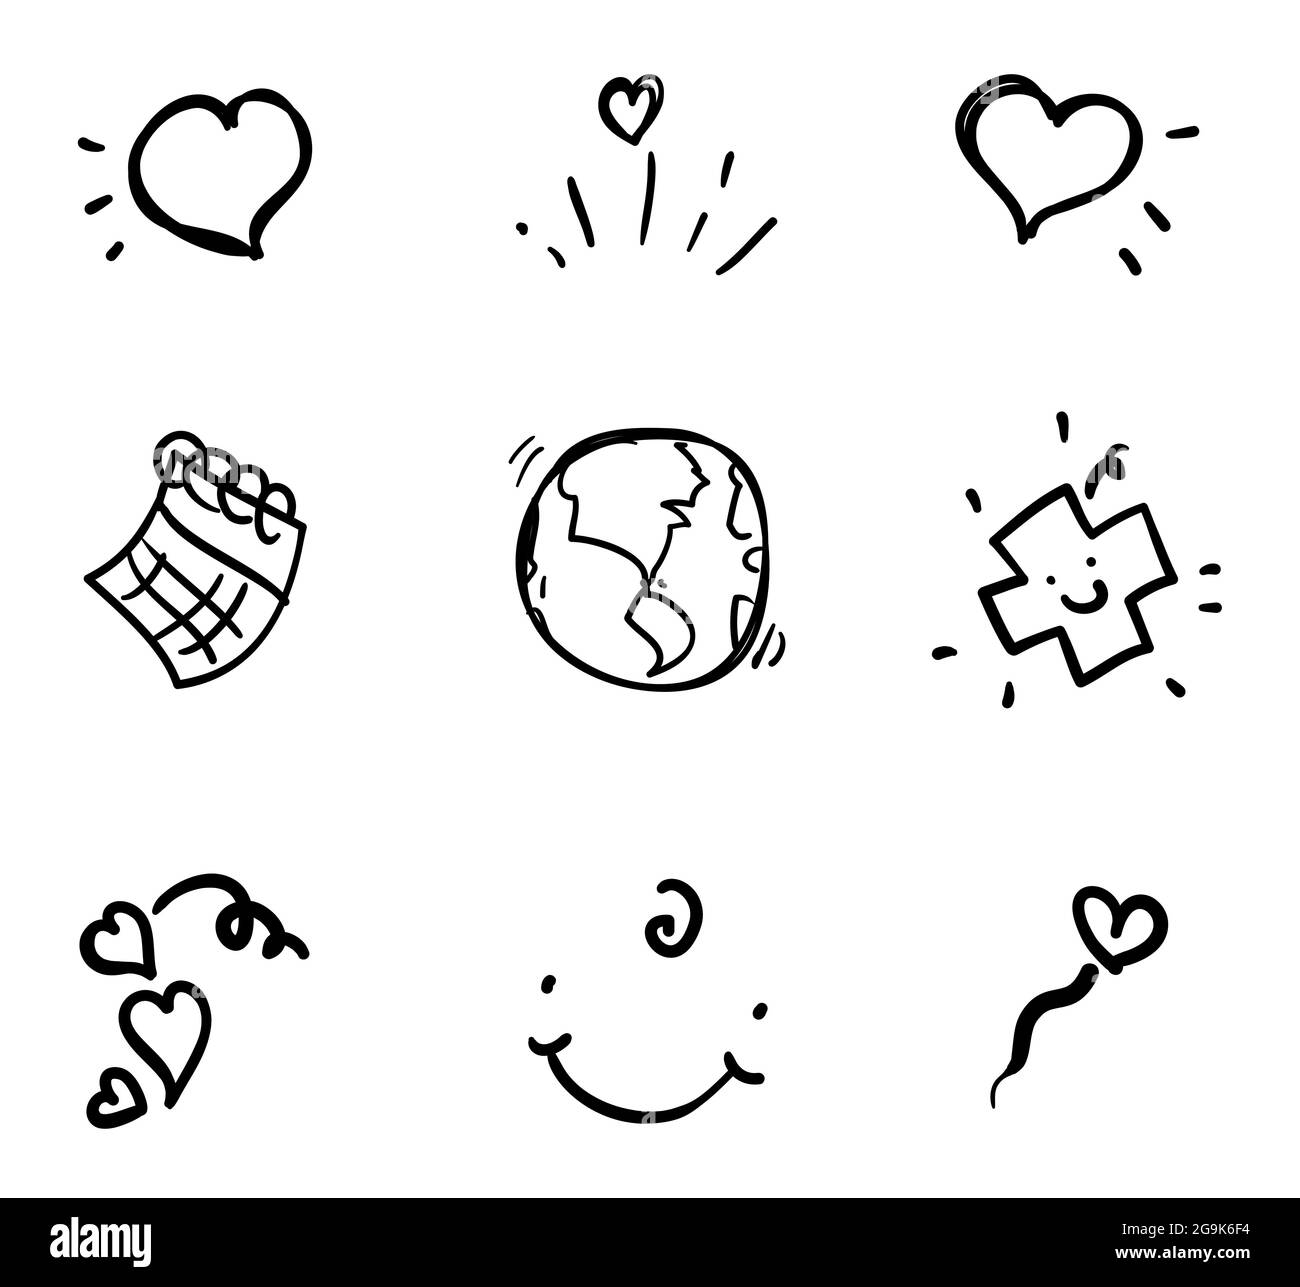 Set of cute doodle drawing: hearts, calendar,cross with smile, happy smiling gesture and planet Earth. Stock Vector